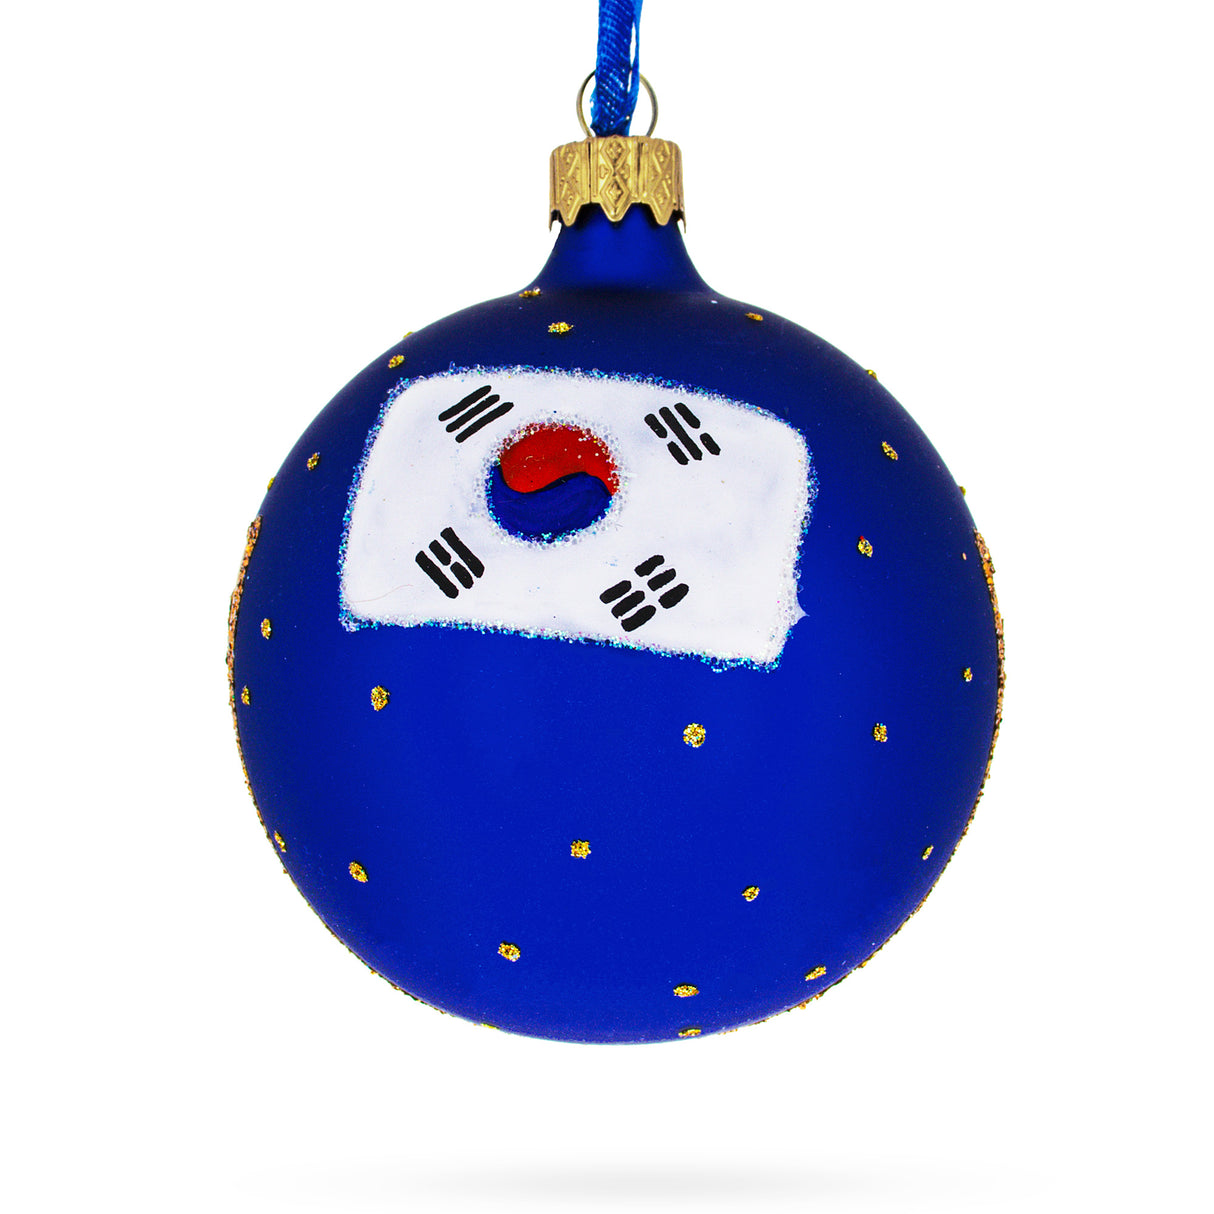 Buy Christmas Ornaments Travel Asia South Korea by BestPysanky Online Gift Ship